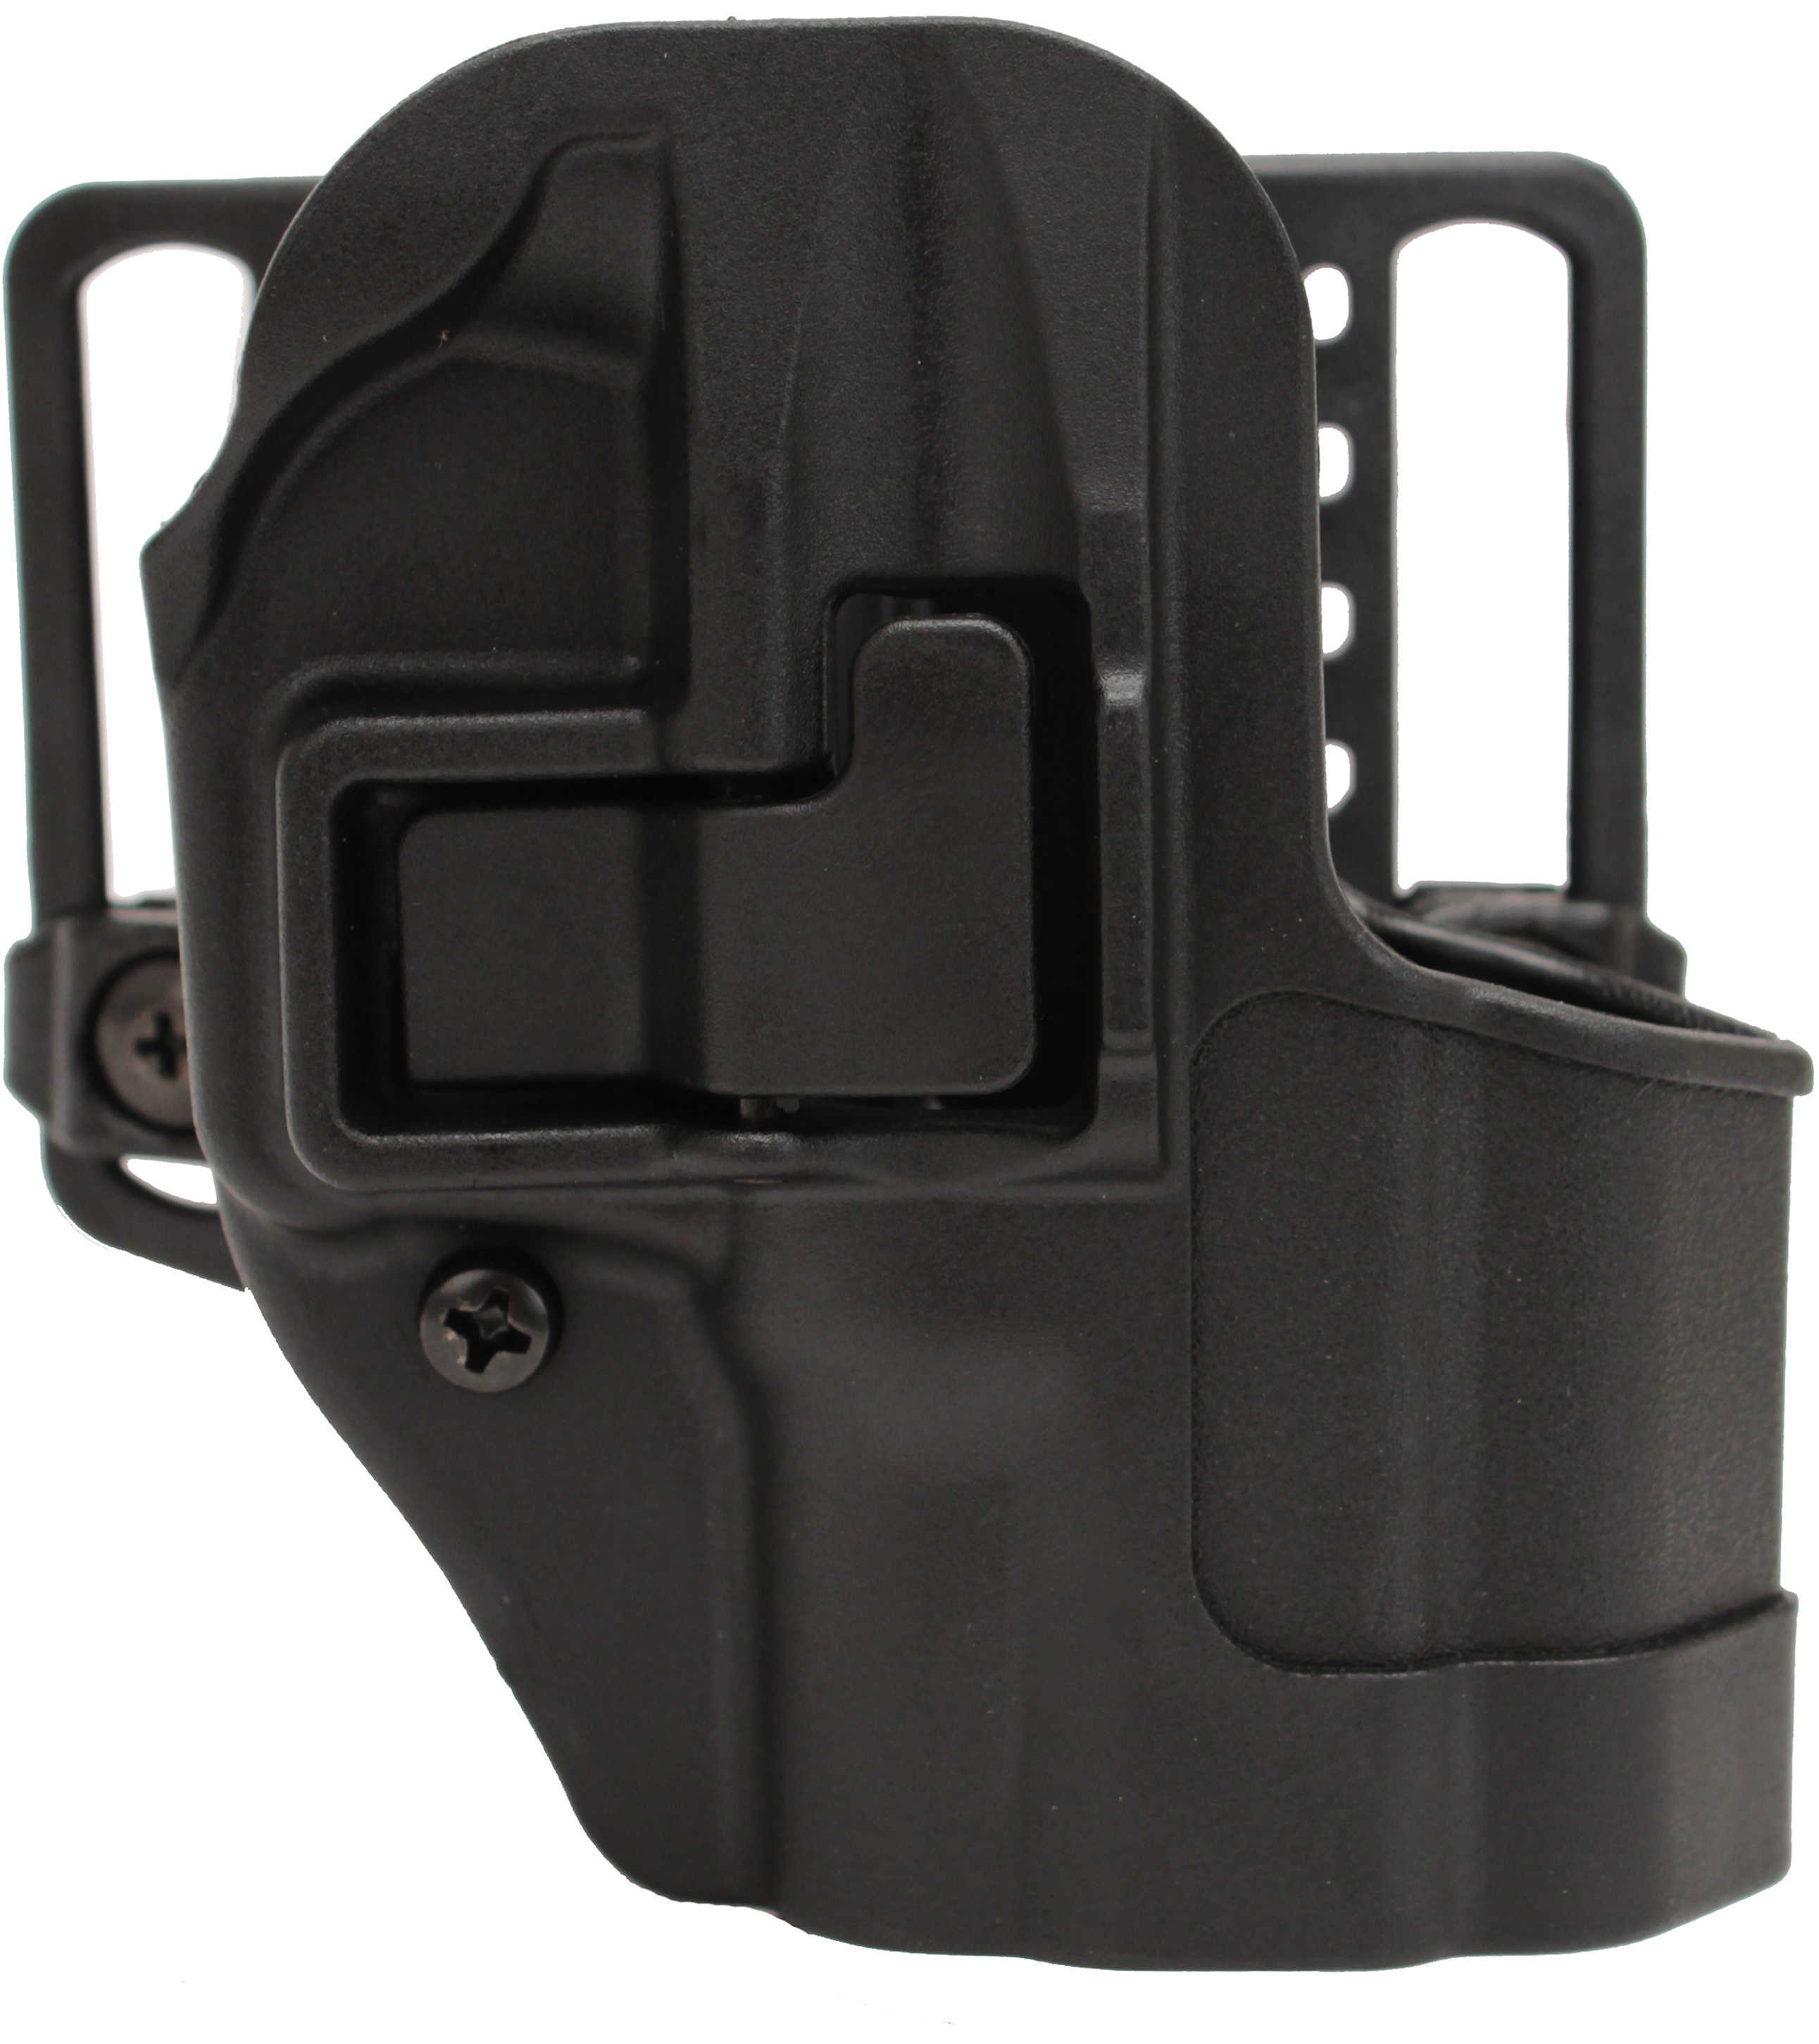 Blackhawk Serpa CQC Matte Holster With Active Retention System - Right Handed Size 31: Springfield XD Sub Co